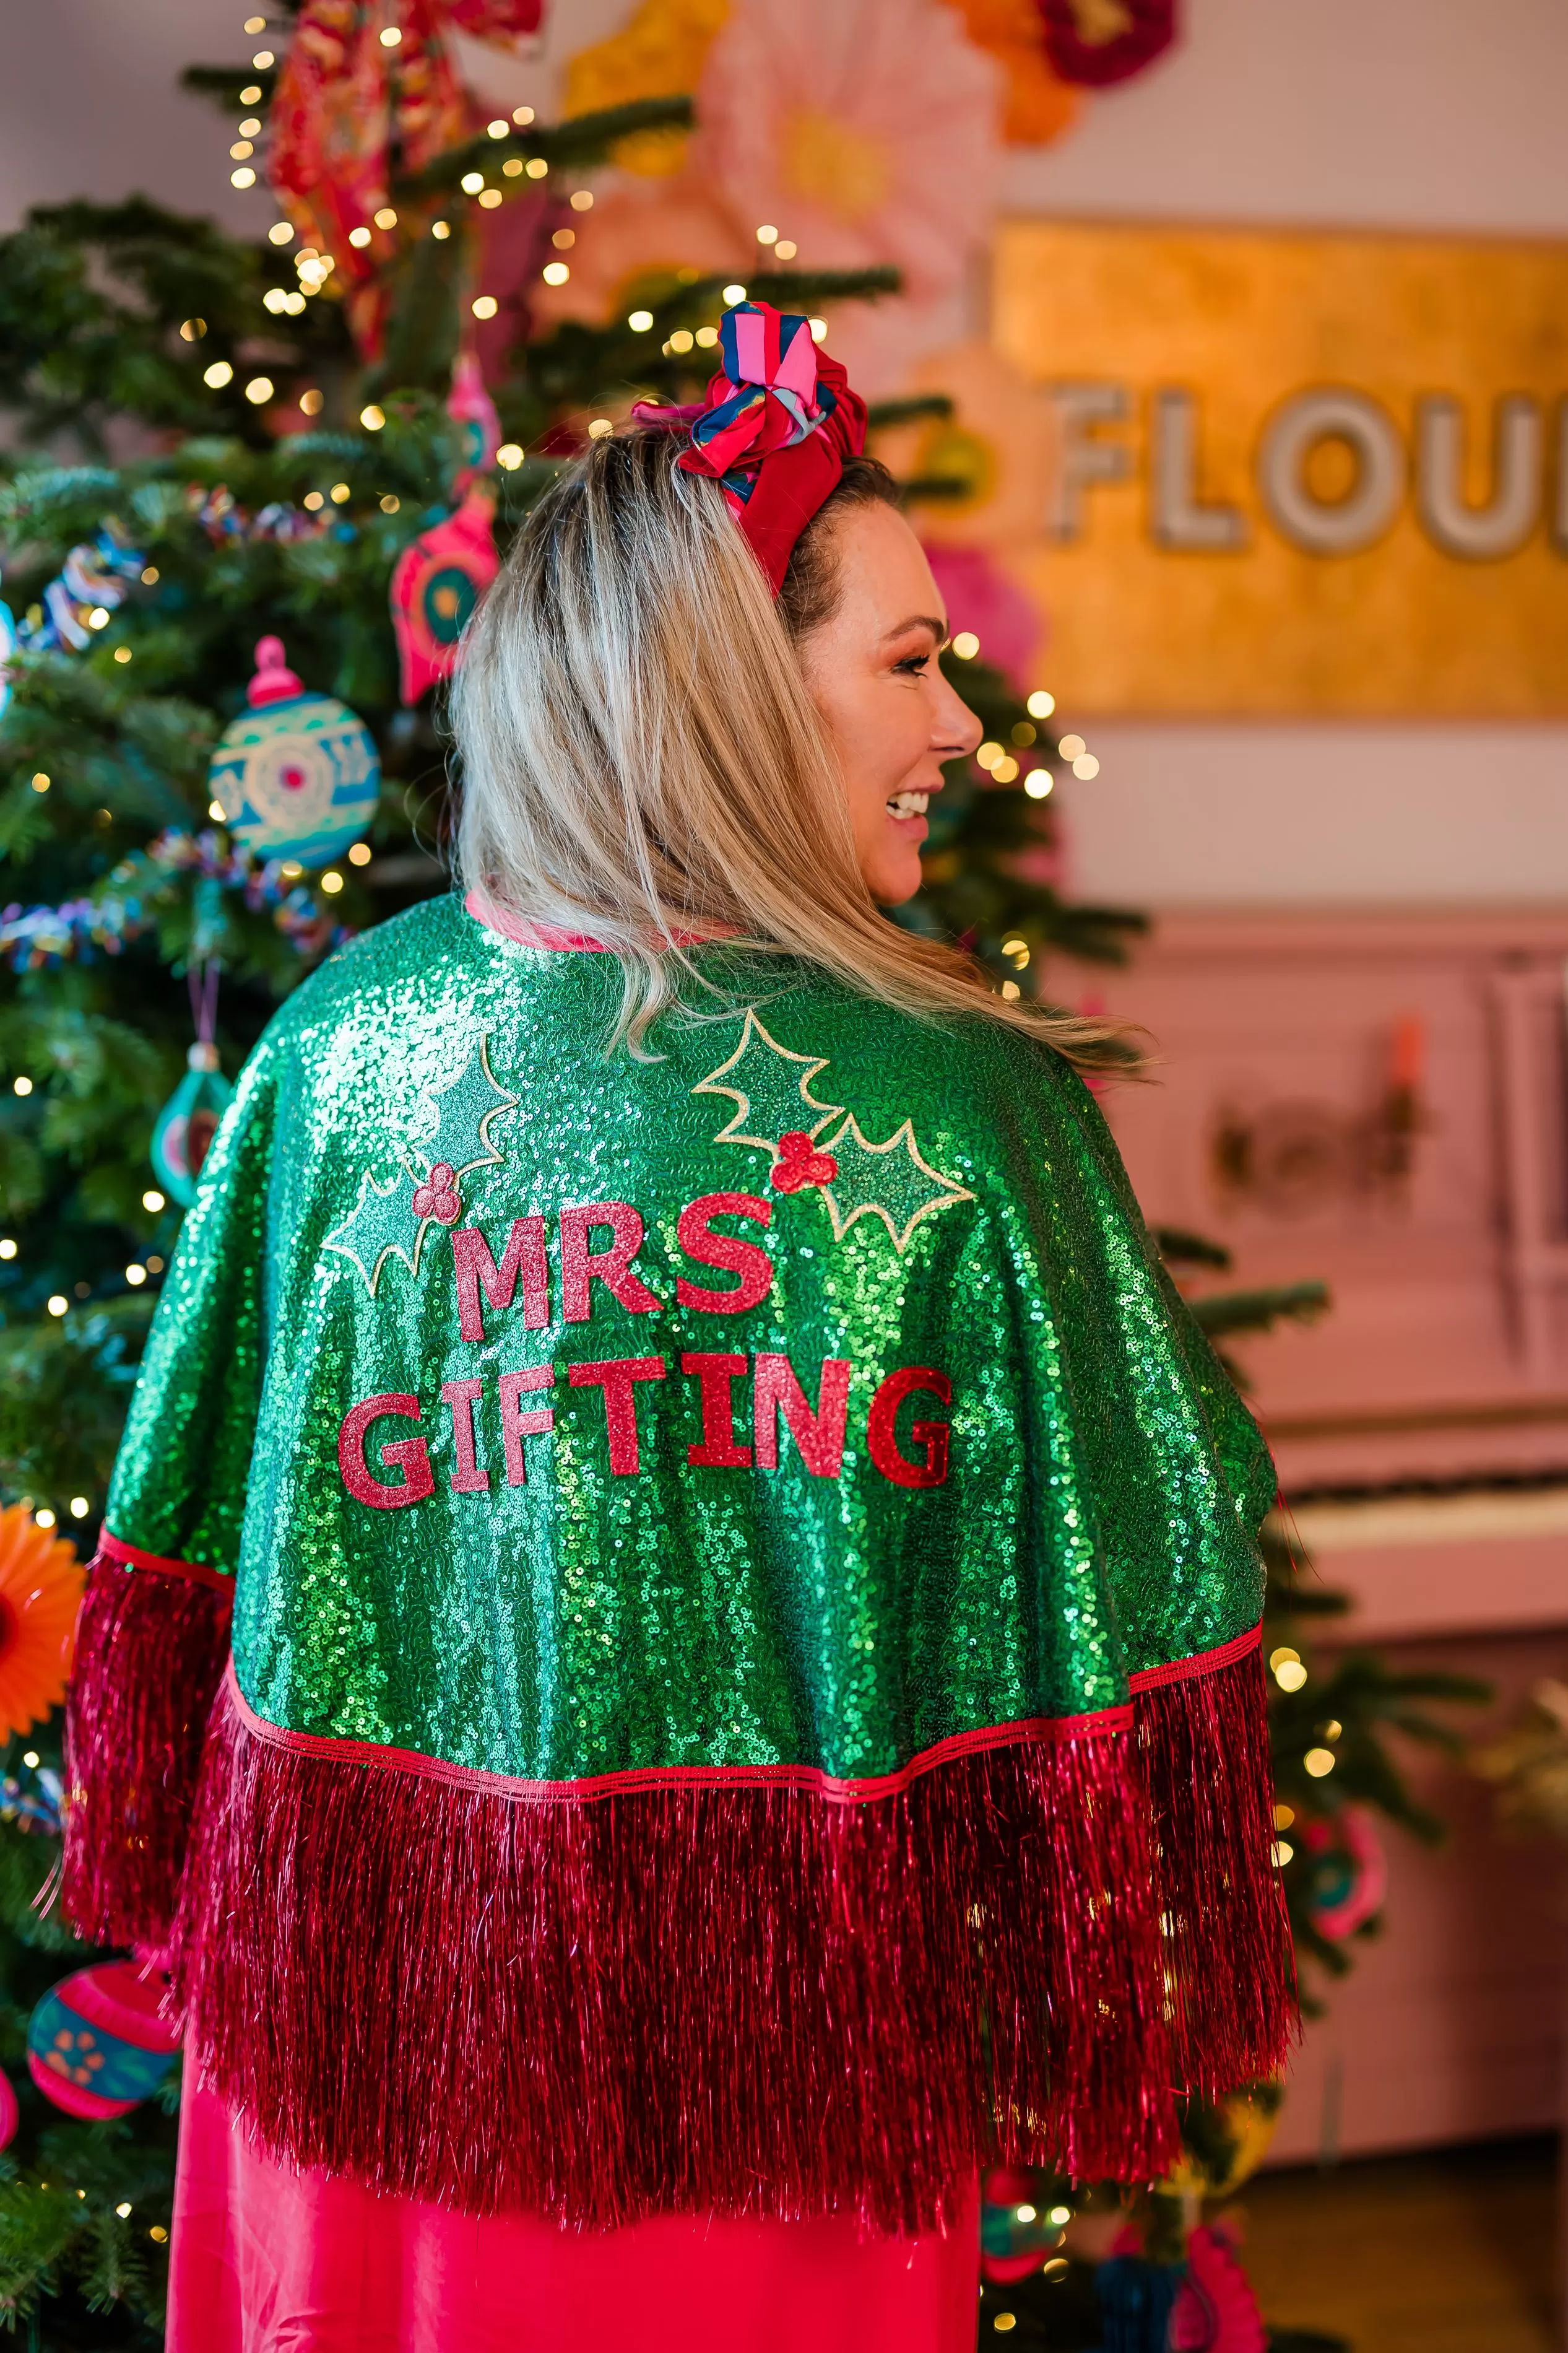 Holly wearing the Mrs Gifting Cape in front of a Christmas tree